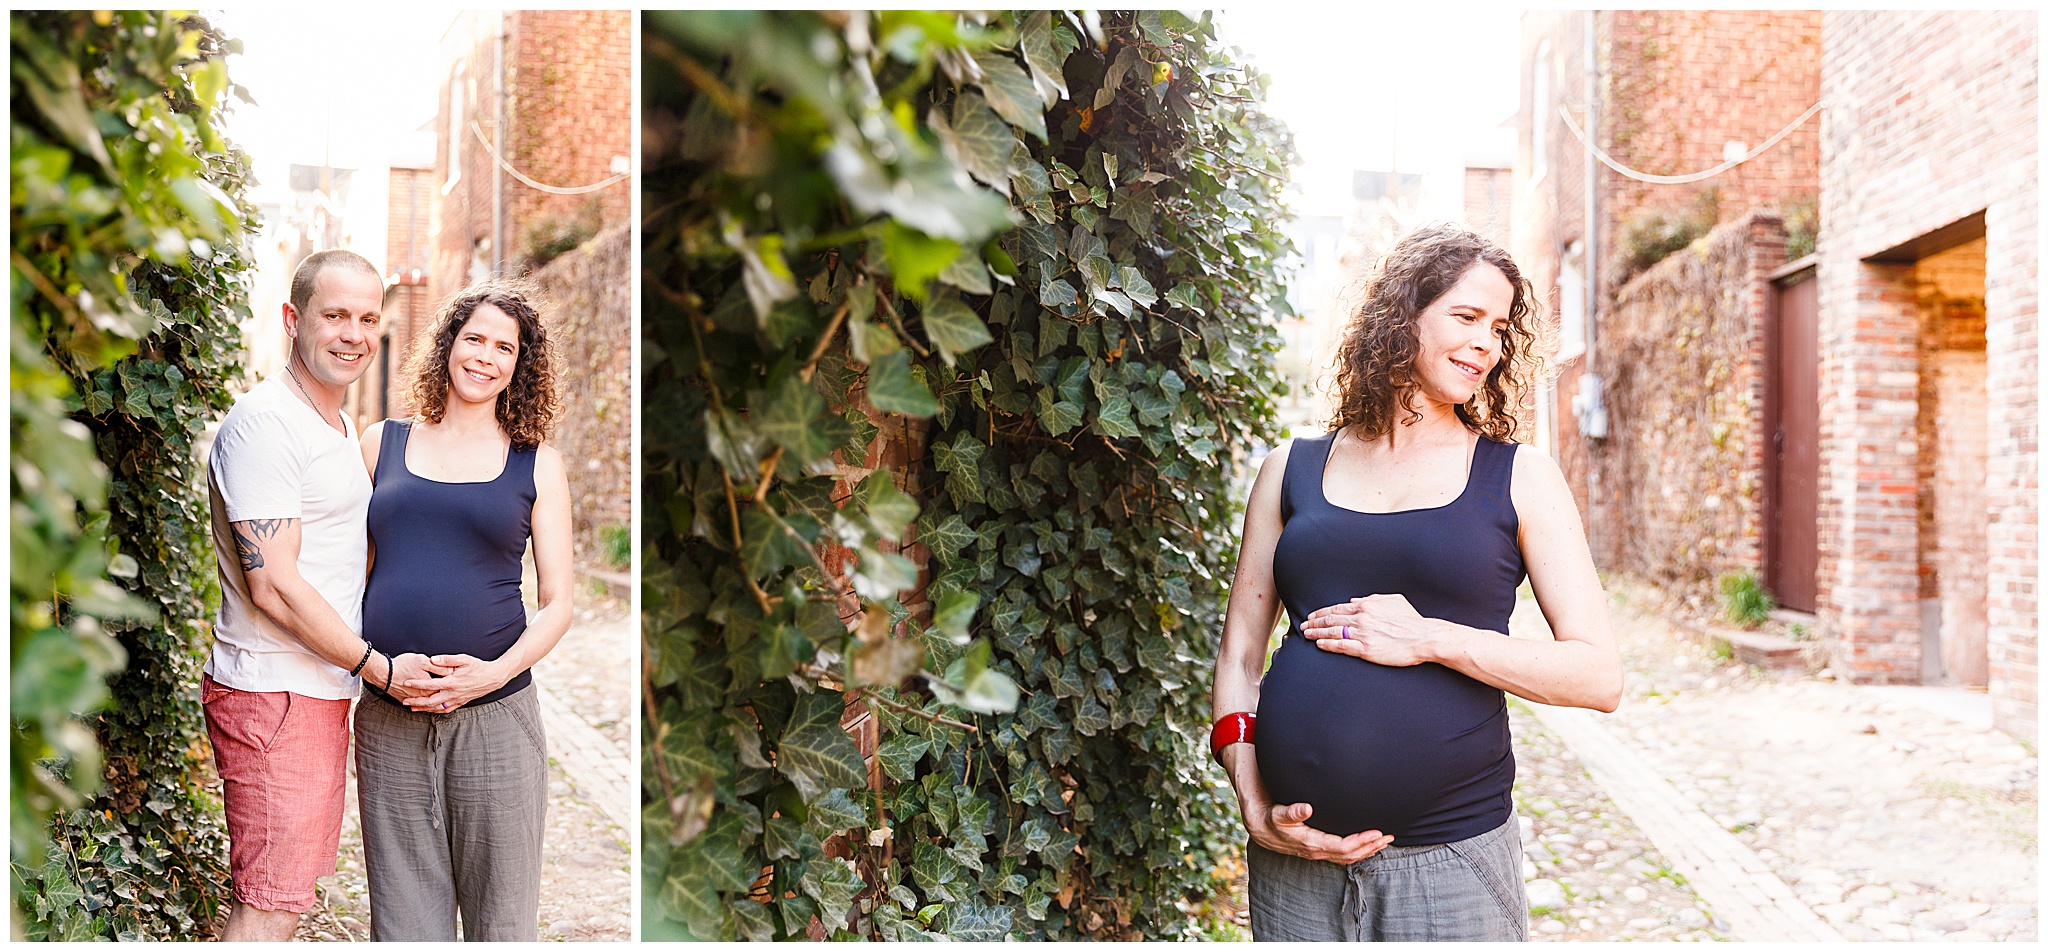 Maternity Photography in Alexandria with Kofmehl Photography